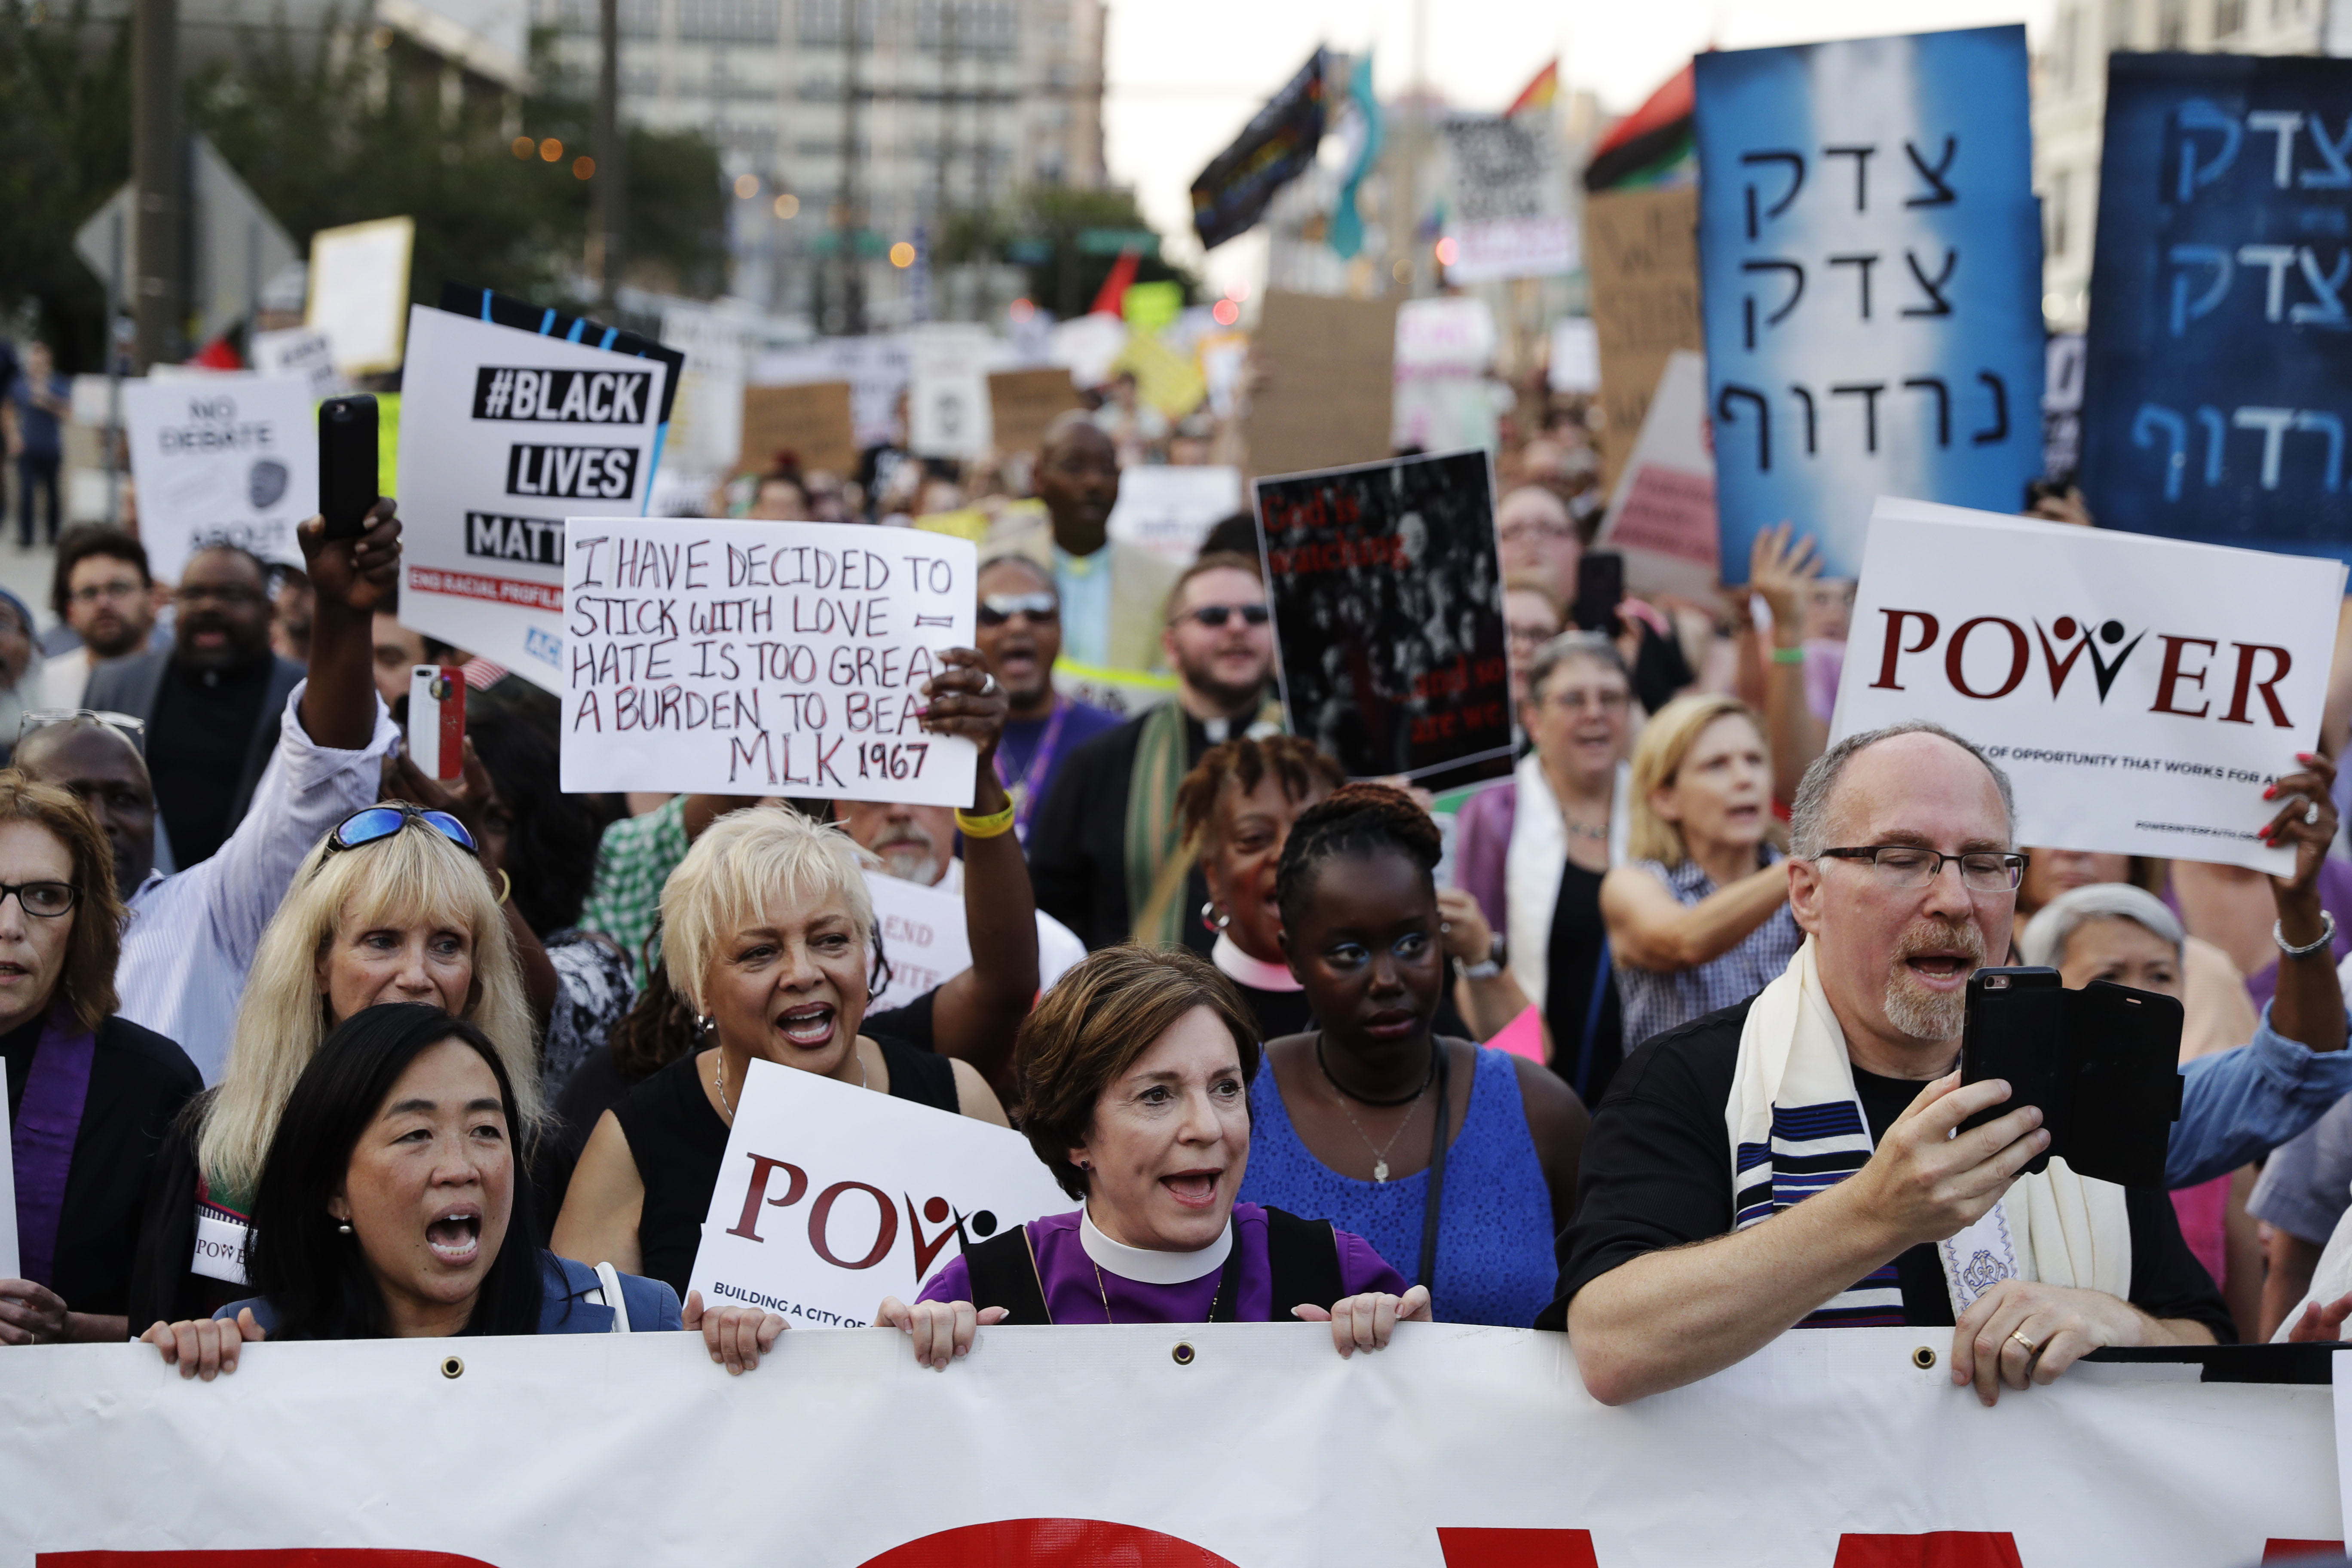 "City Councilwoman Helen Gym, left, marches with protesters as they demonstrate in response to a white nationalist rally held in Charlottesville, Va., over the weekend, in Philadelphia." 